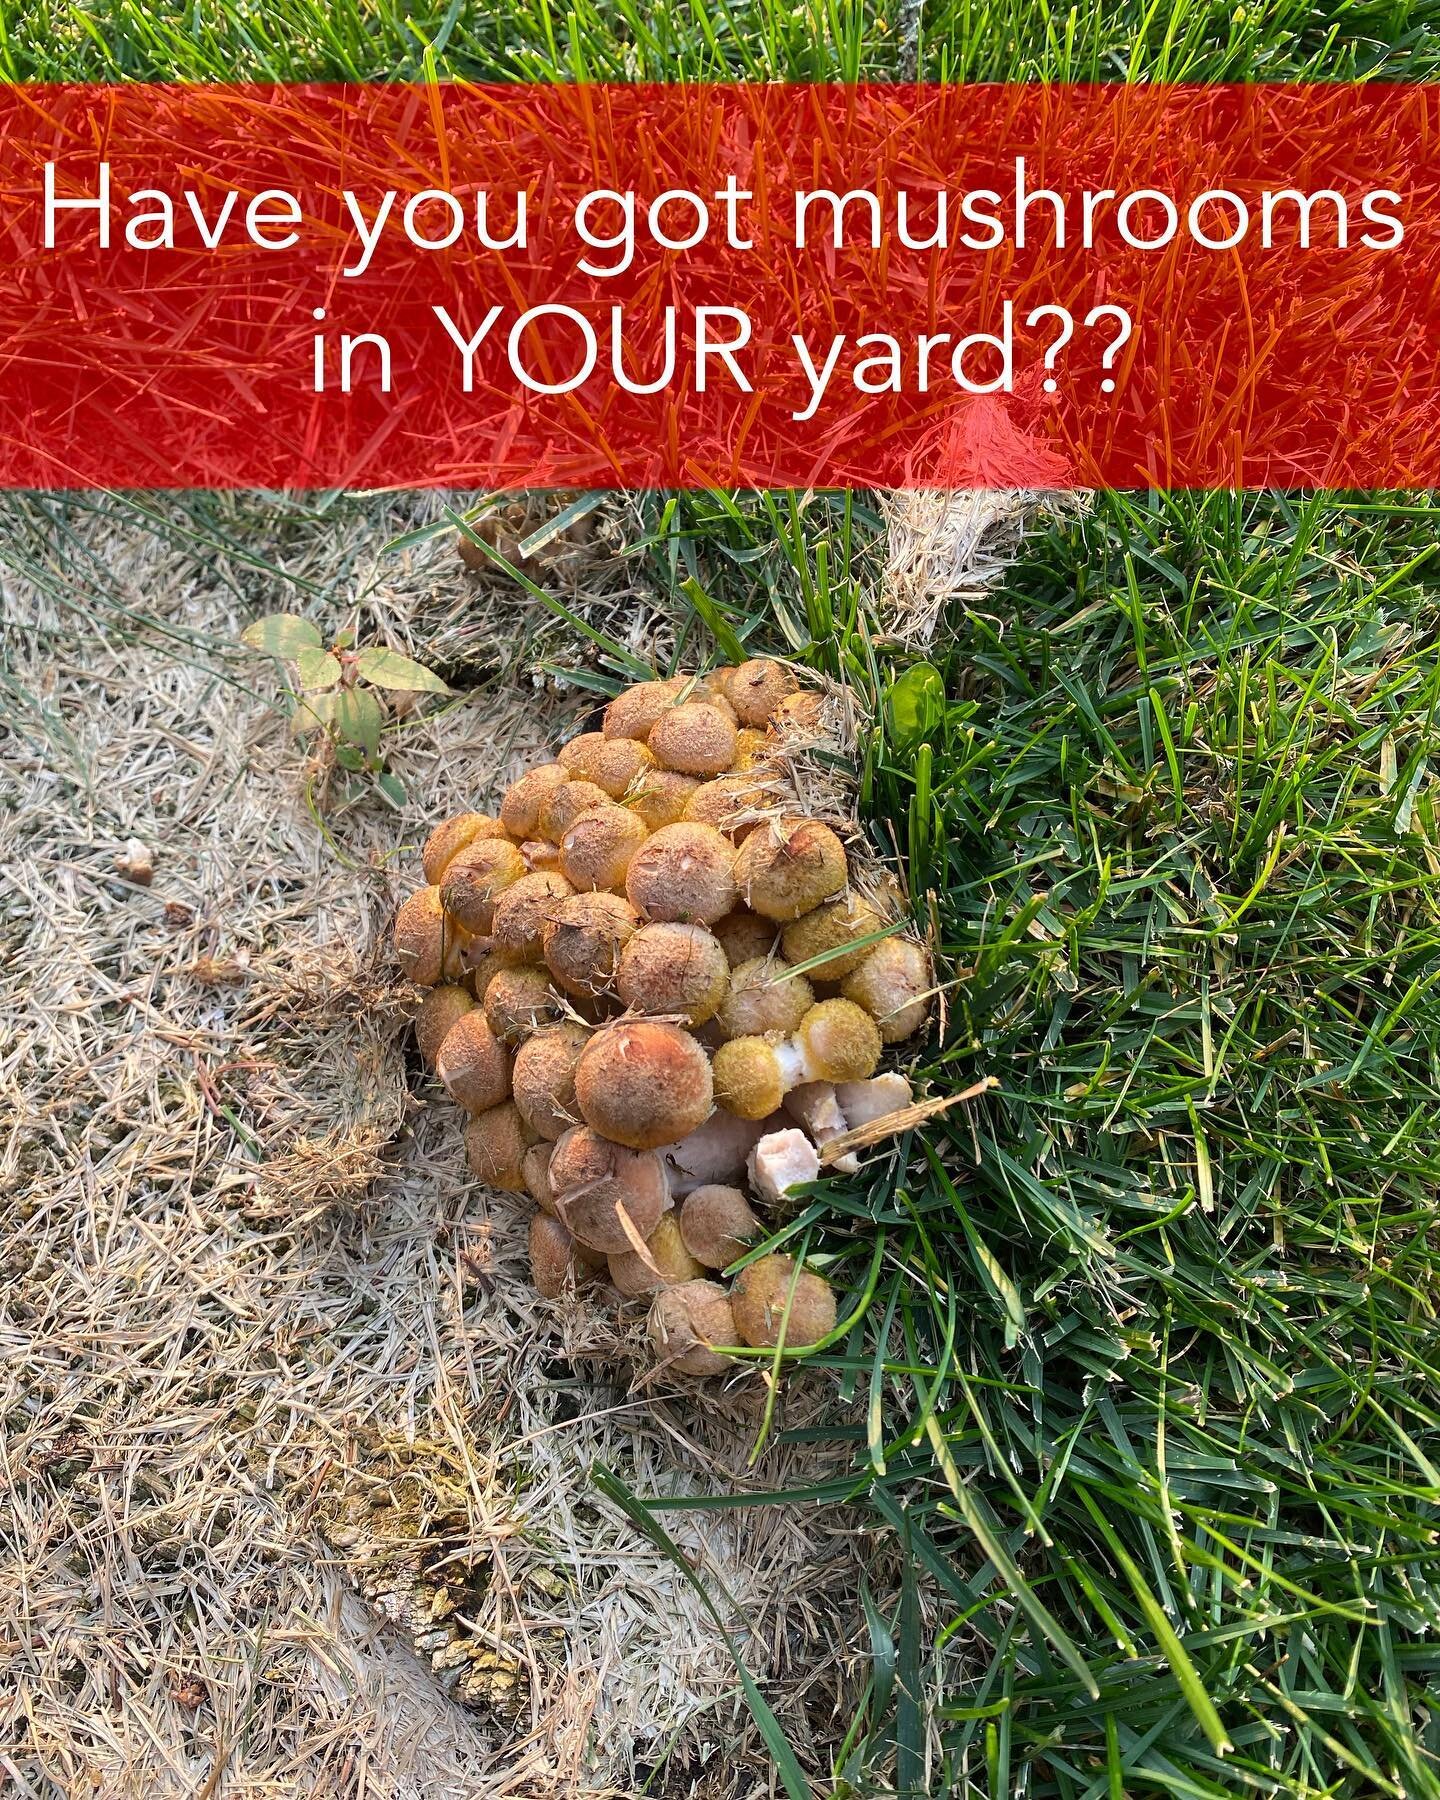 You&rsquo;ve probably heard us talk about Armillaria before&hellip; but just what the heck is it??

Armillaria is a species of fungus that can spread through a number of deciduous and coniferous trees. The fungus can survive for many years in the deb